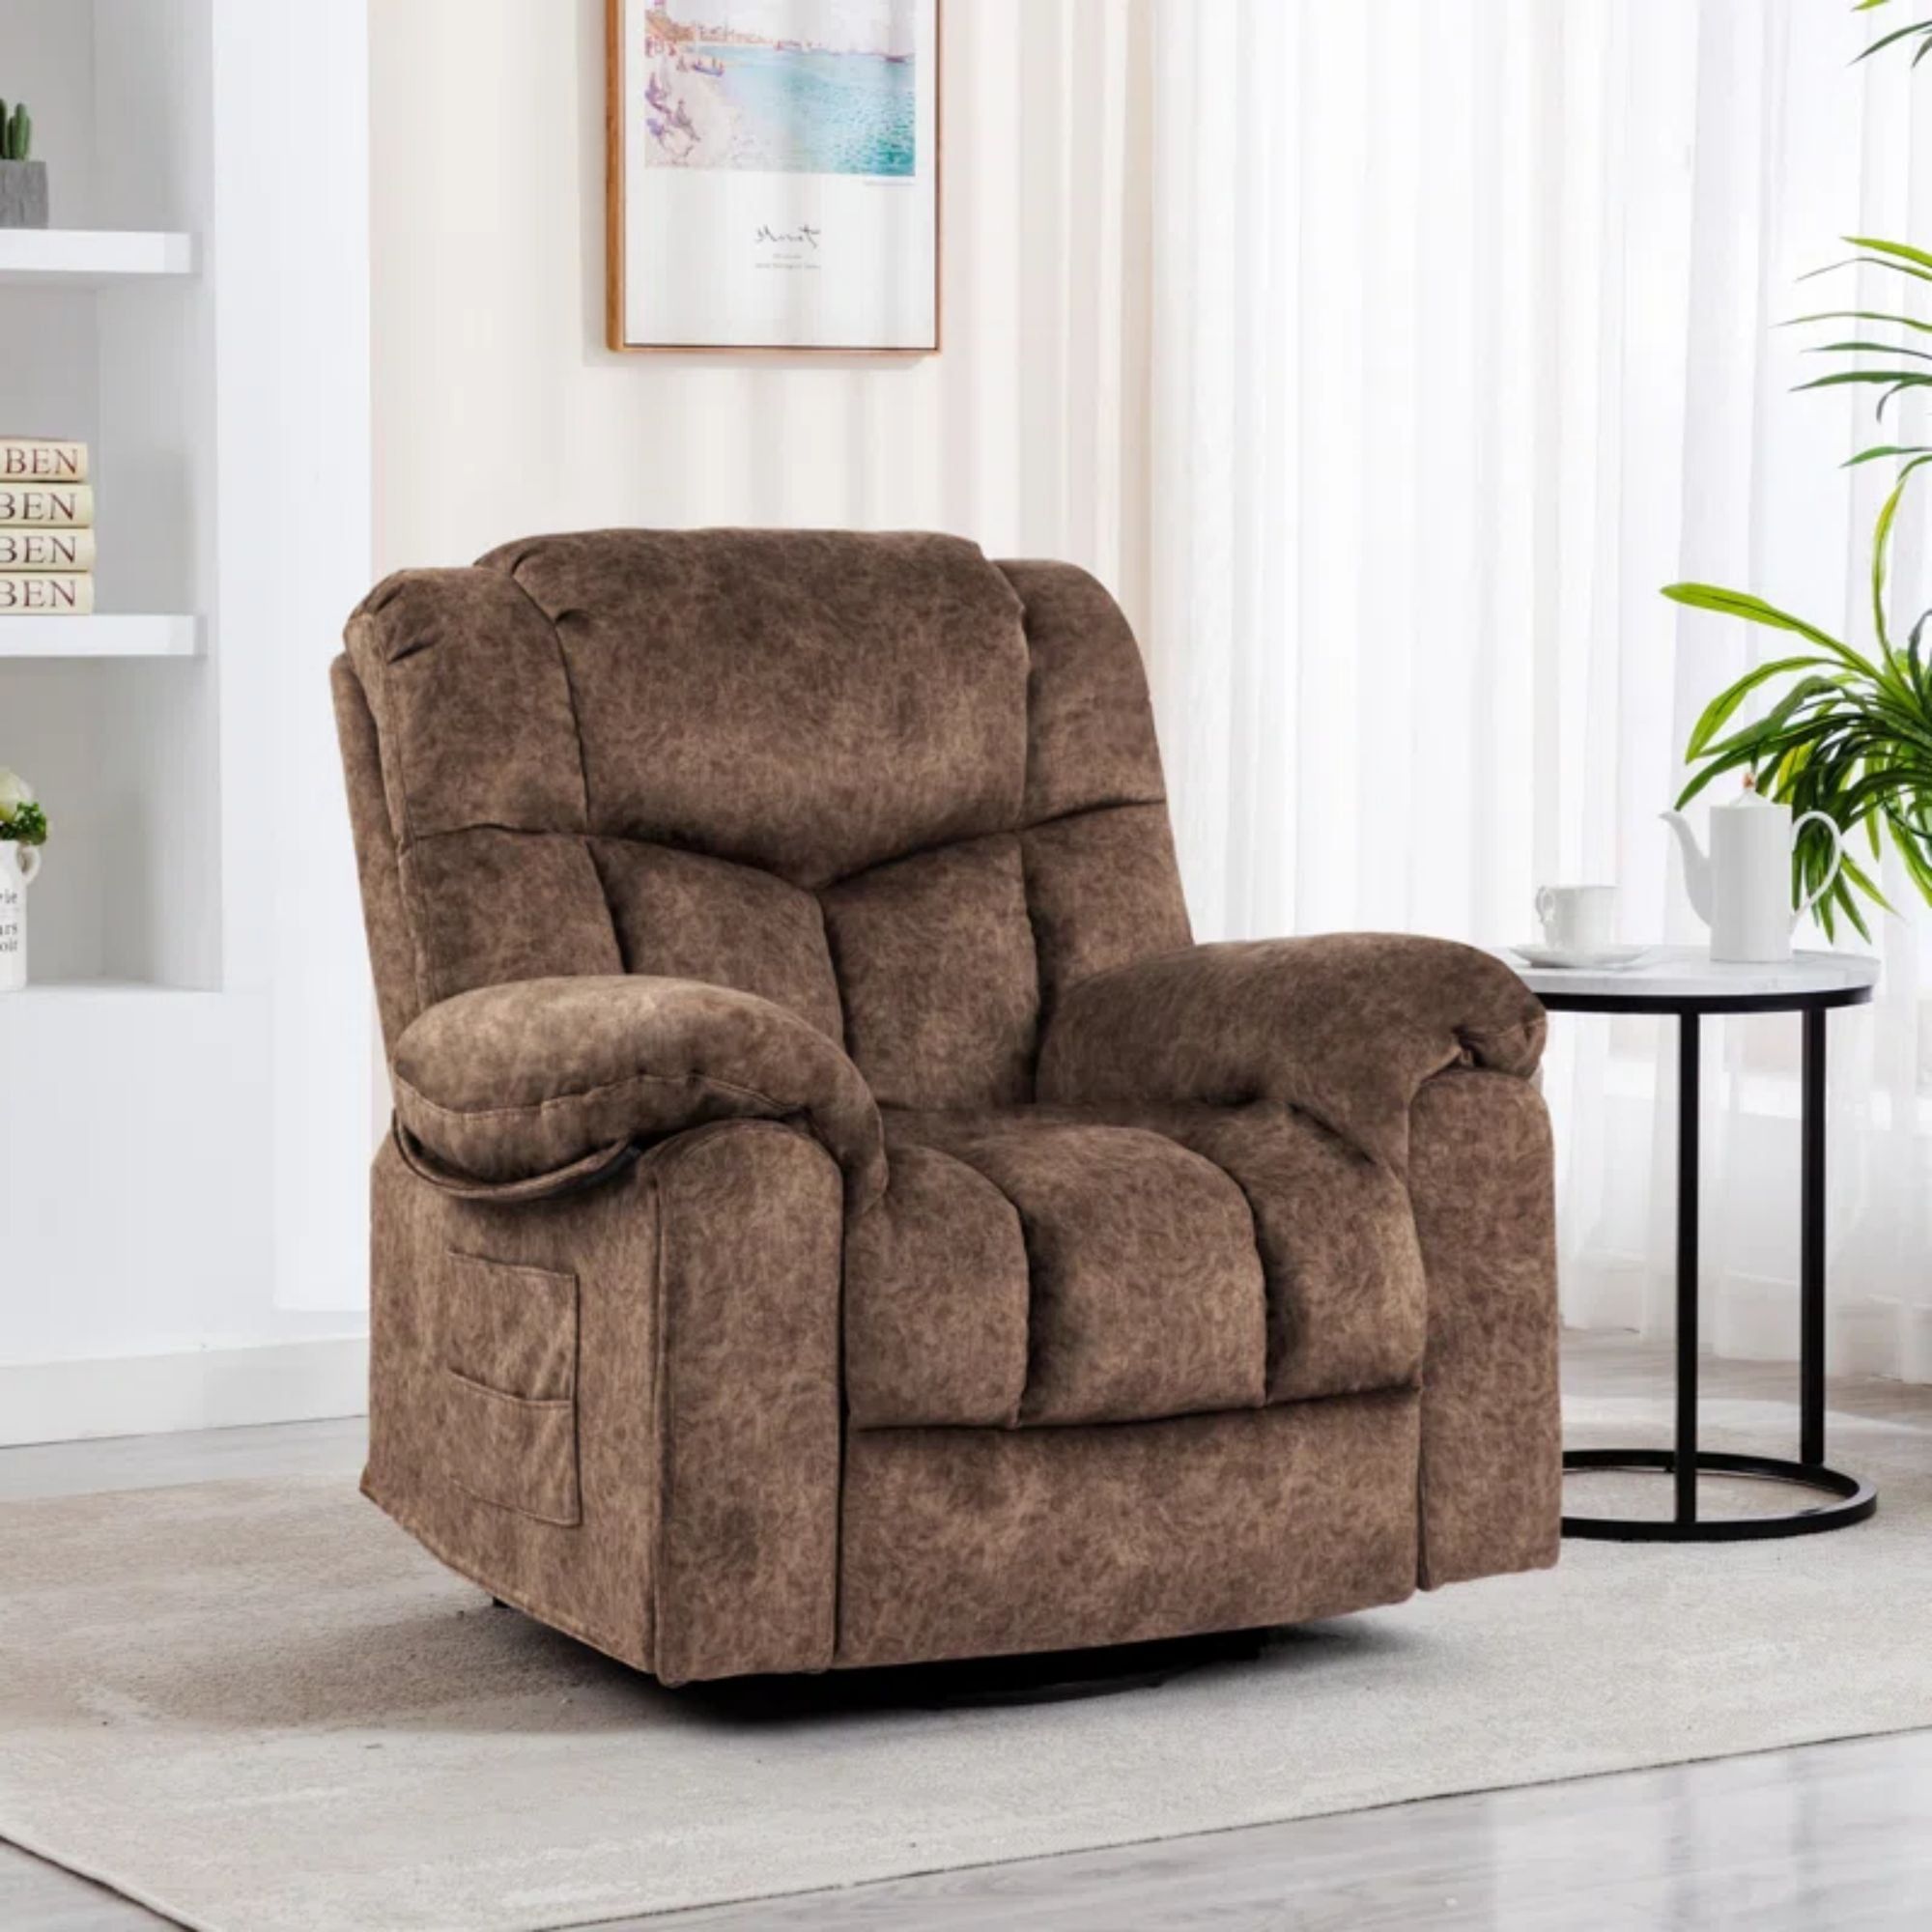 Colerline 35.43" Wide Modern Velvet Upholstered Heating & Massage Swivel  Reclining Rocker Chair With Hidden Cupholders For Living Room And Bedroom,  Brown – Walmart With Regard To Modern Velvet Upholstered Recliner Chairs (Photo 2 of 15)